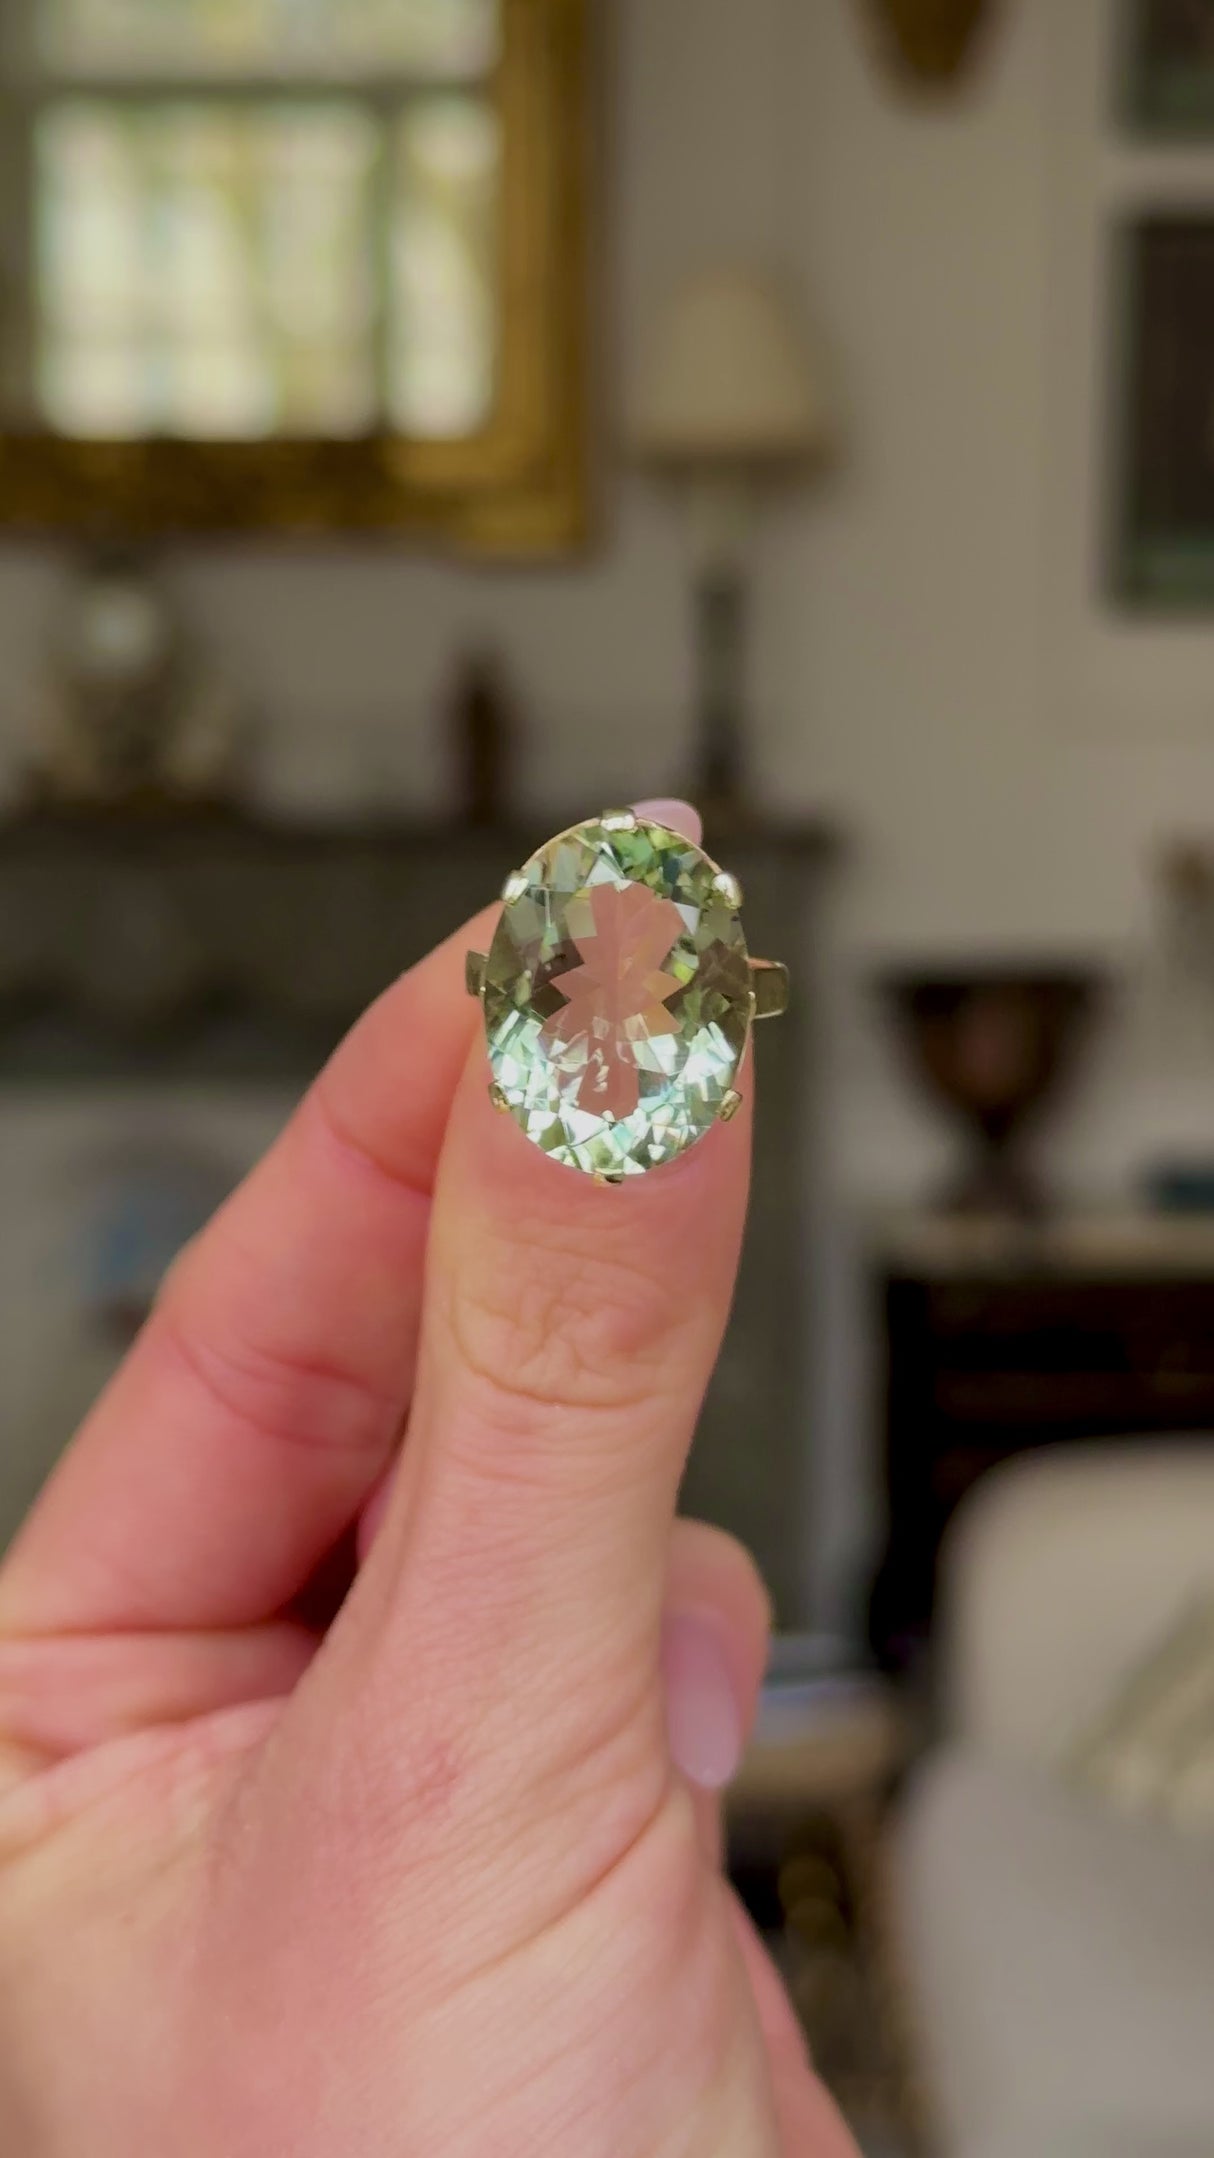 Vintage, Mint Quartz Cocktail Ring held in fingers and moved around to give perspective.